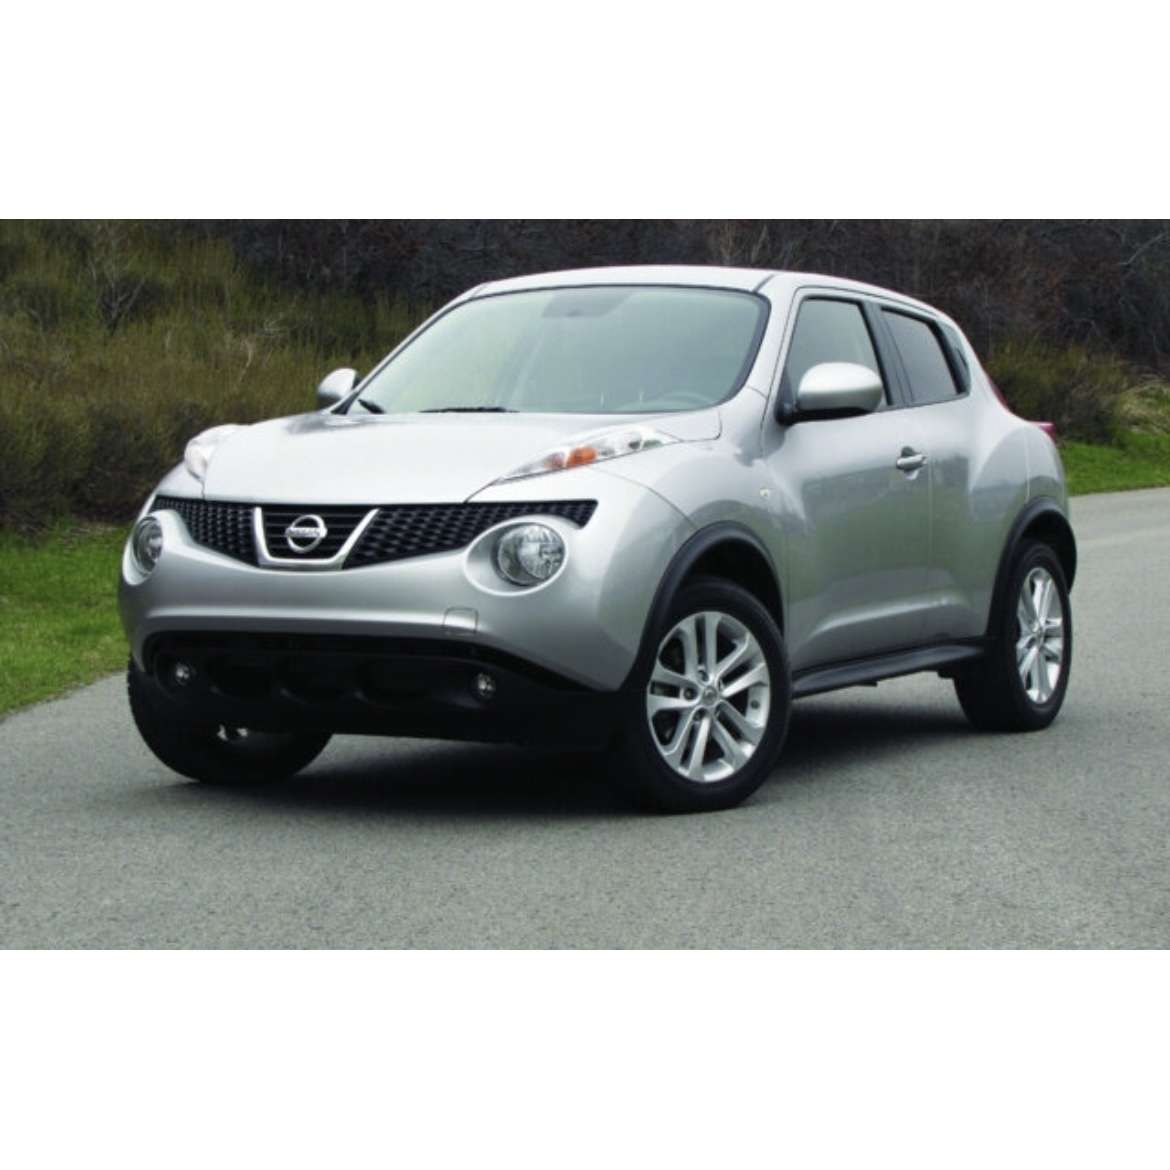 Nissan juke 2012 puzzle online from photo